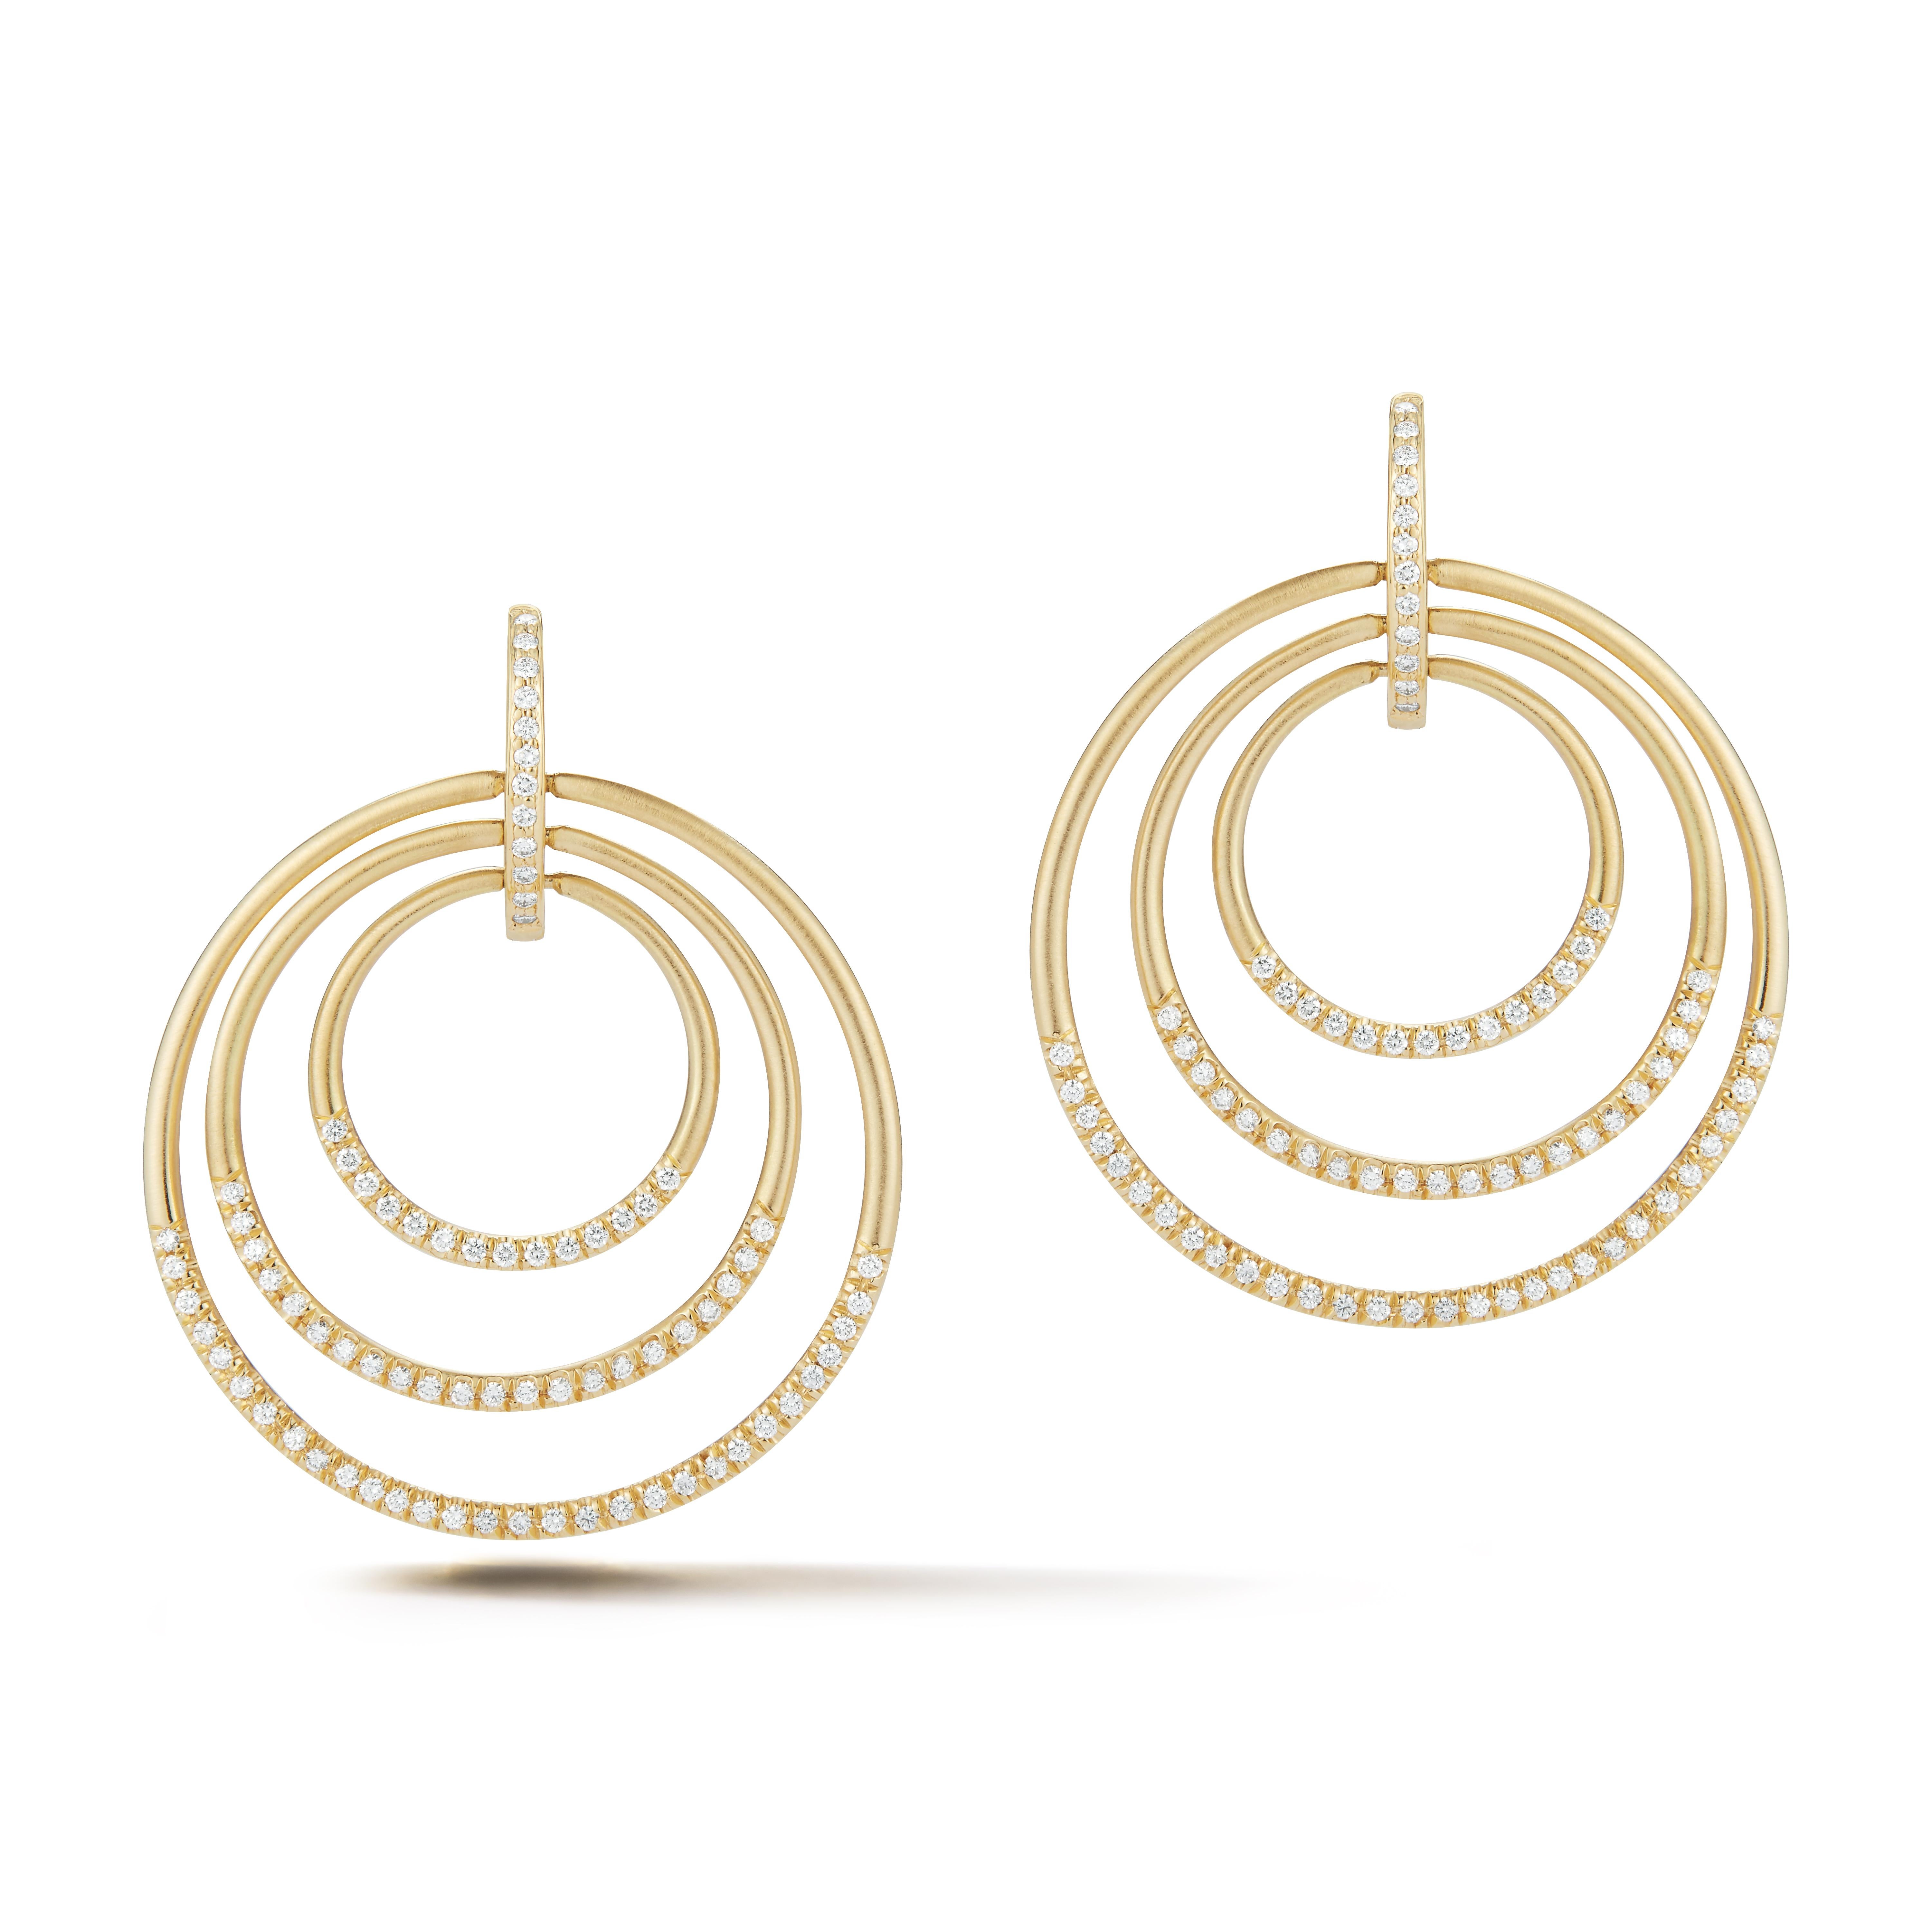 Drawing inspiration from the 1930's Streamline Moderne movement, sleek curves and horizontal lines sculpt architectural adornments of structure and sophistication.

The definition of minimalist chic, these large Moderne earrings captivate with three